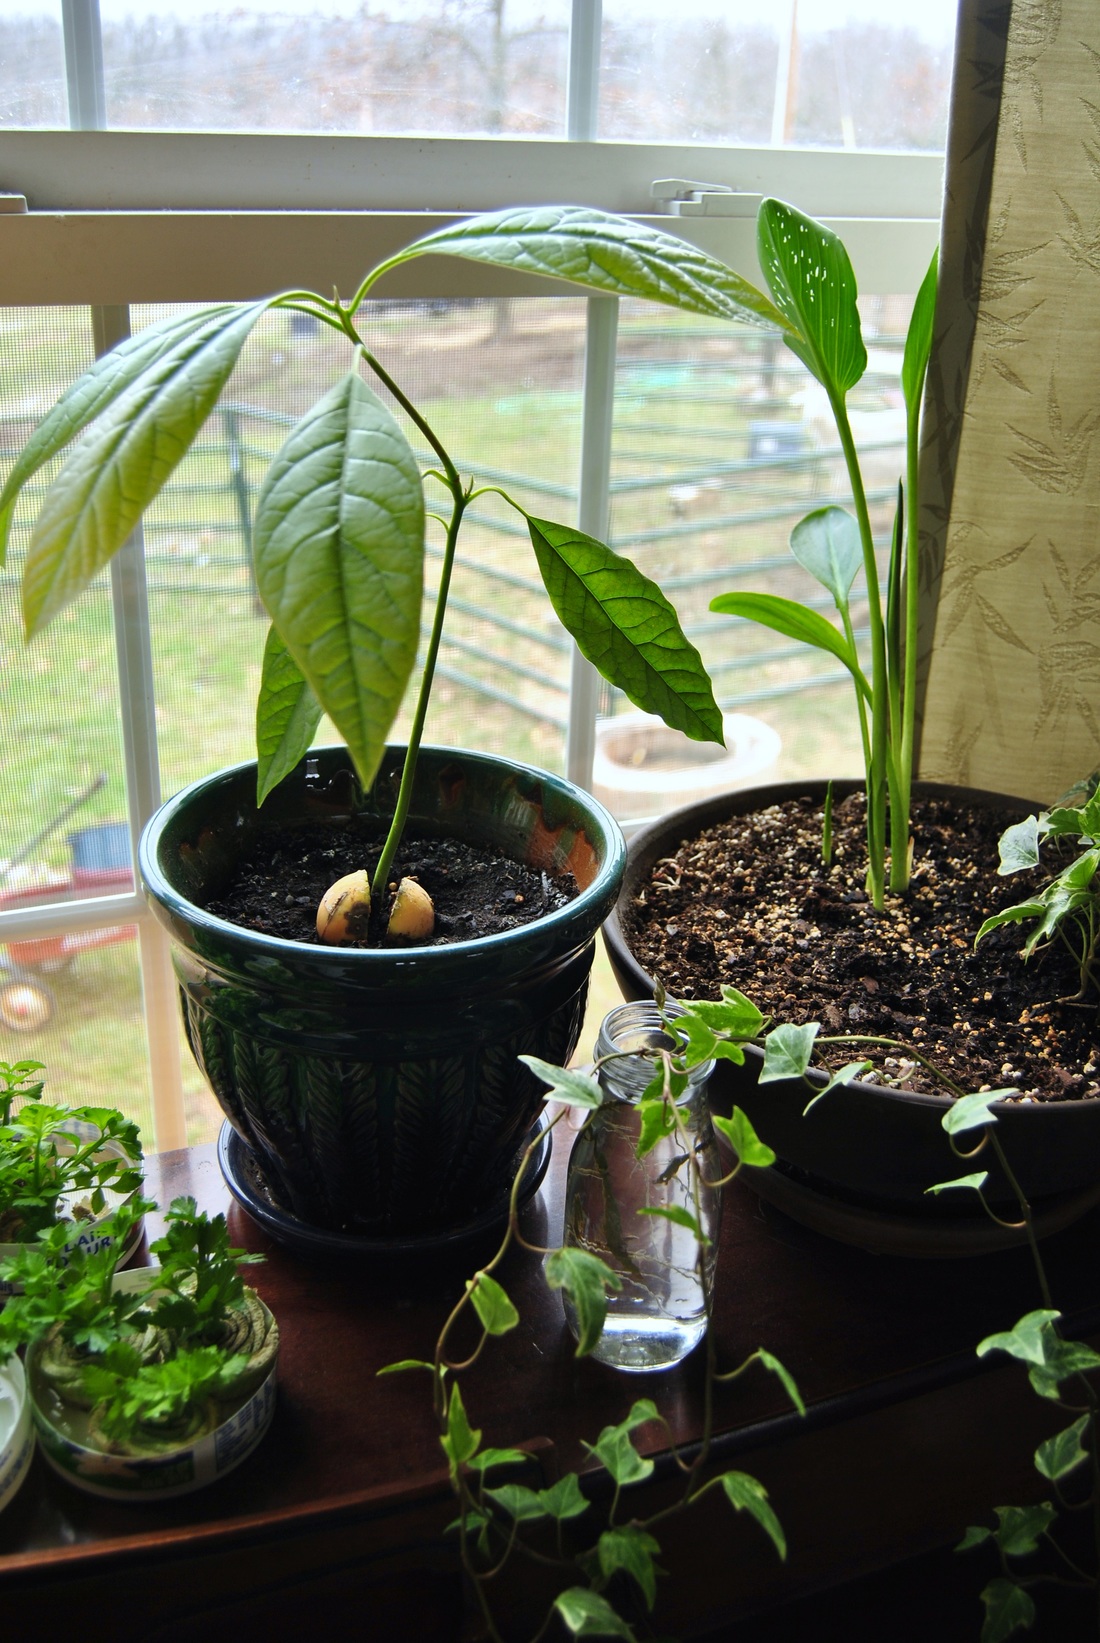 #8. Learn to Grow an Avocado Tree From a Seed - 12 DIY Garden Hacks to Take Your Backyard to the Next Level